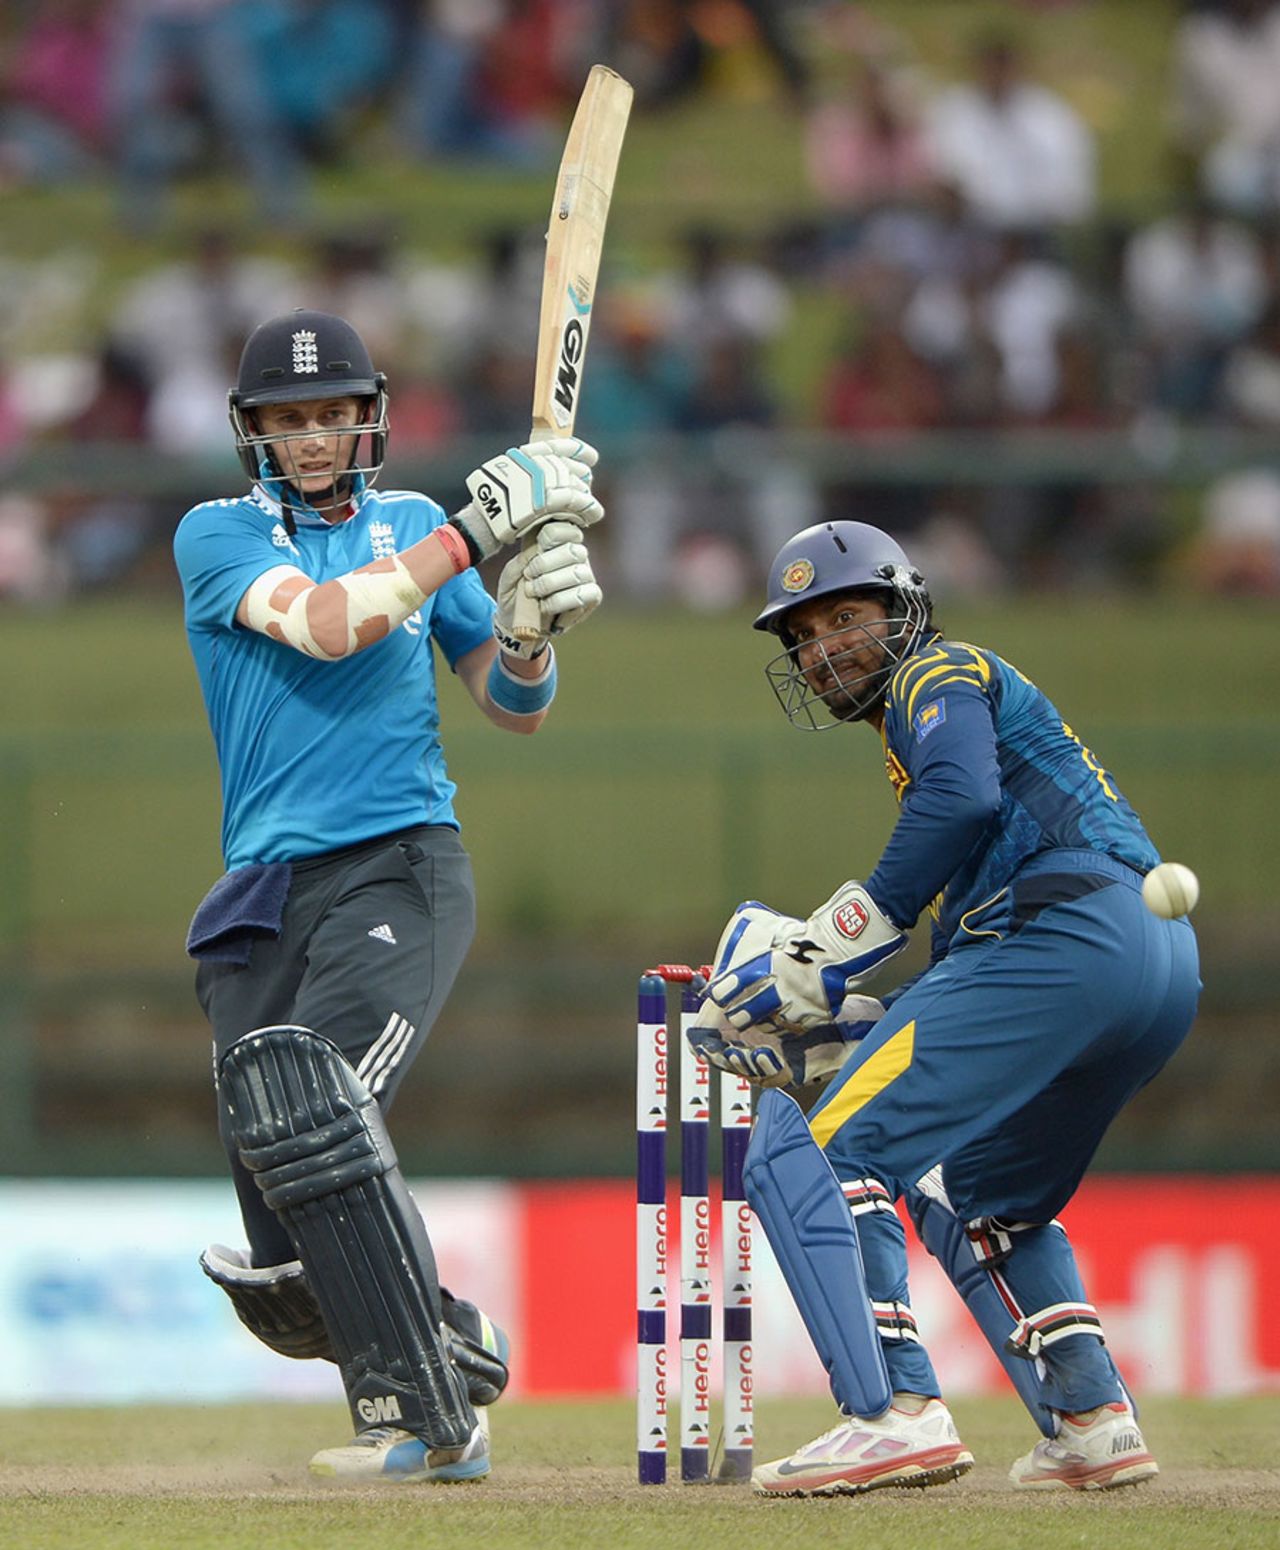 Only Joe Root with a measured half-century got to grips with the chase, Sri Lanka v England, 6th ODI, Pallekele, December 13, 2014